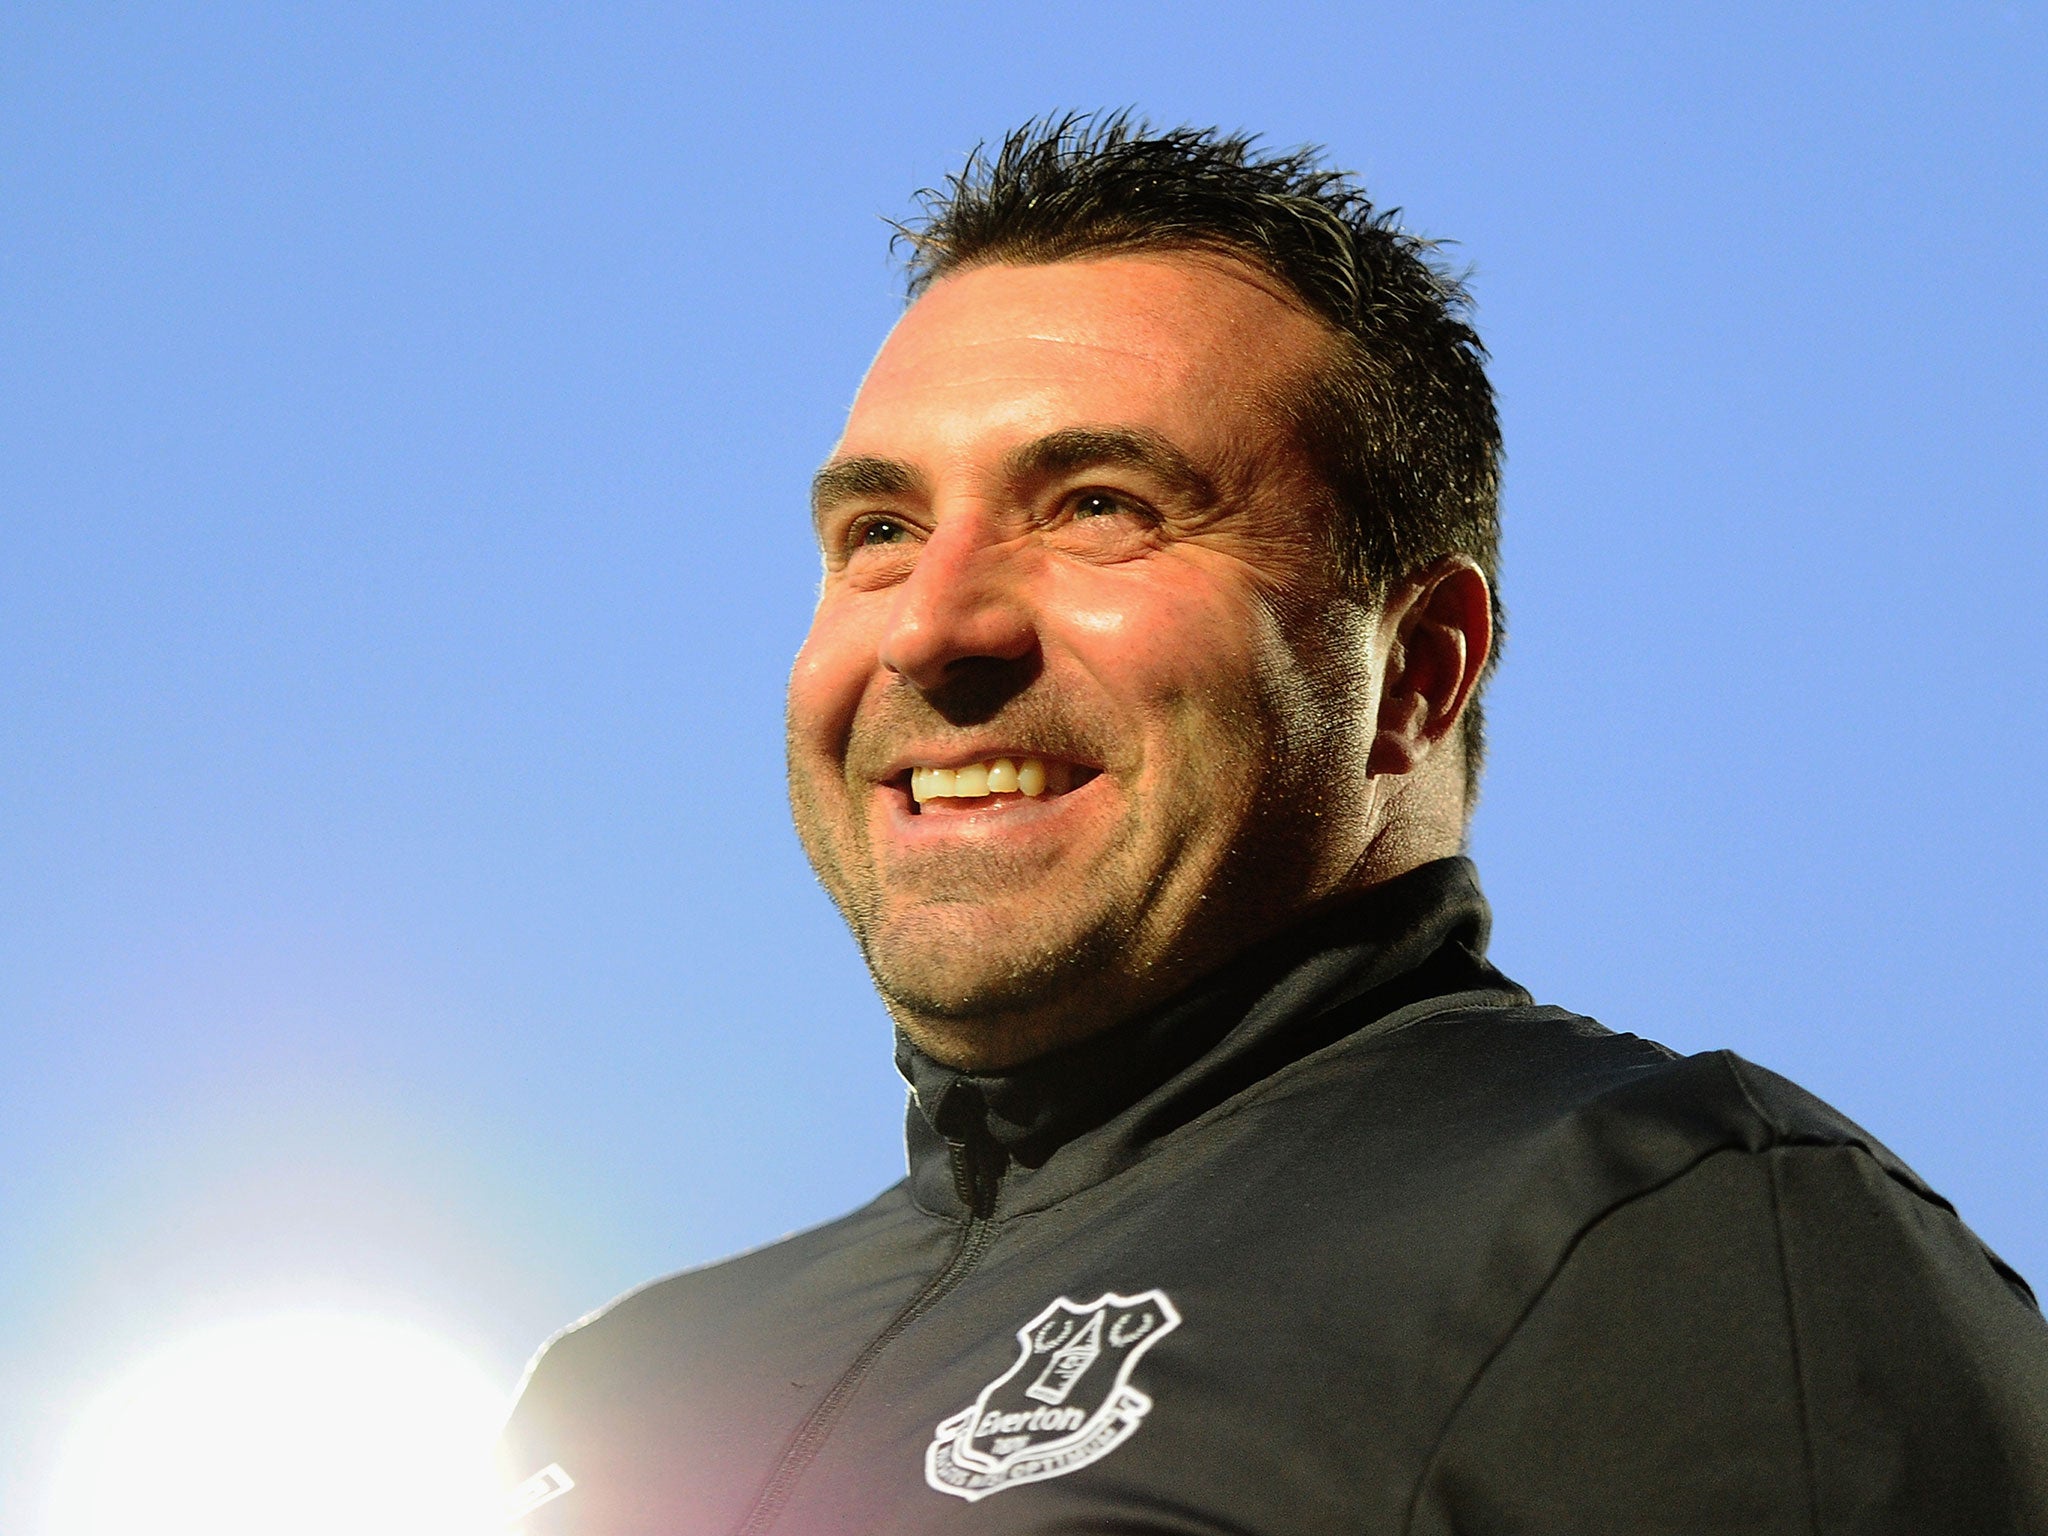 David Unsworth has made a name for himself at Everton